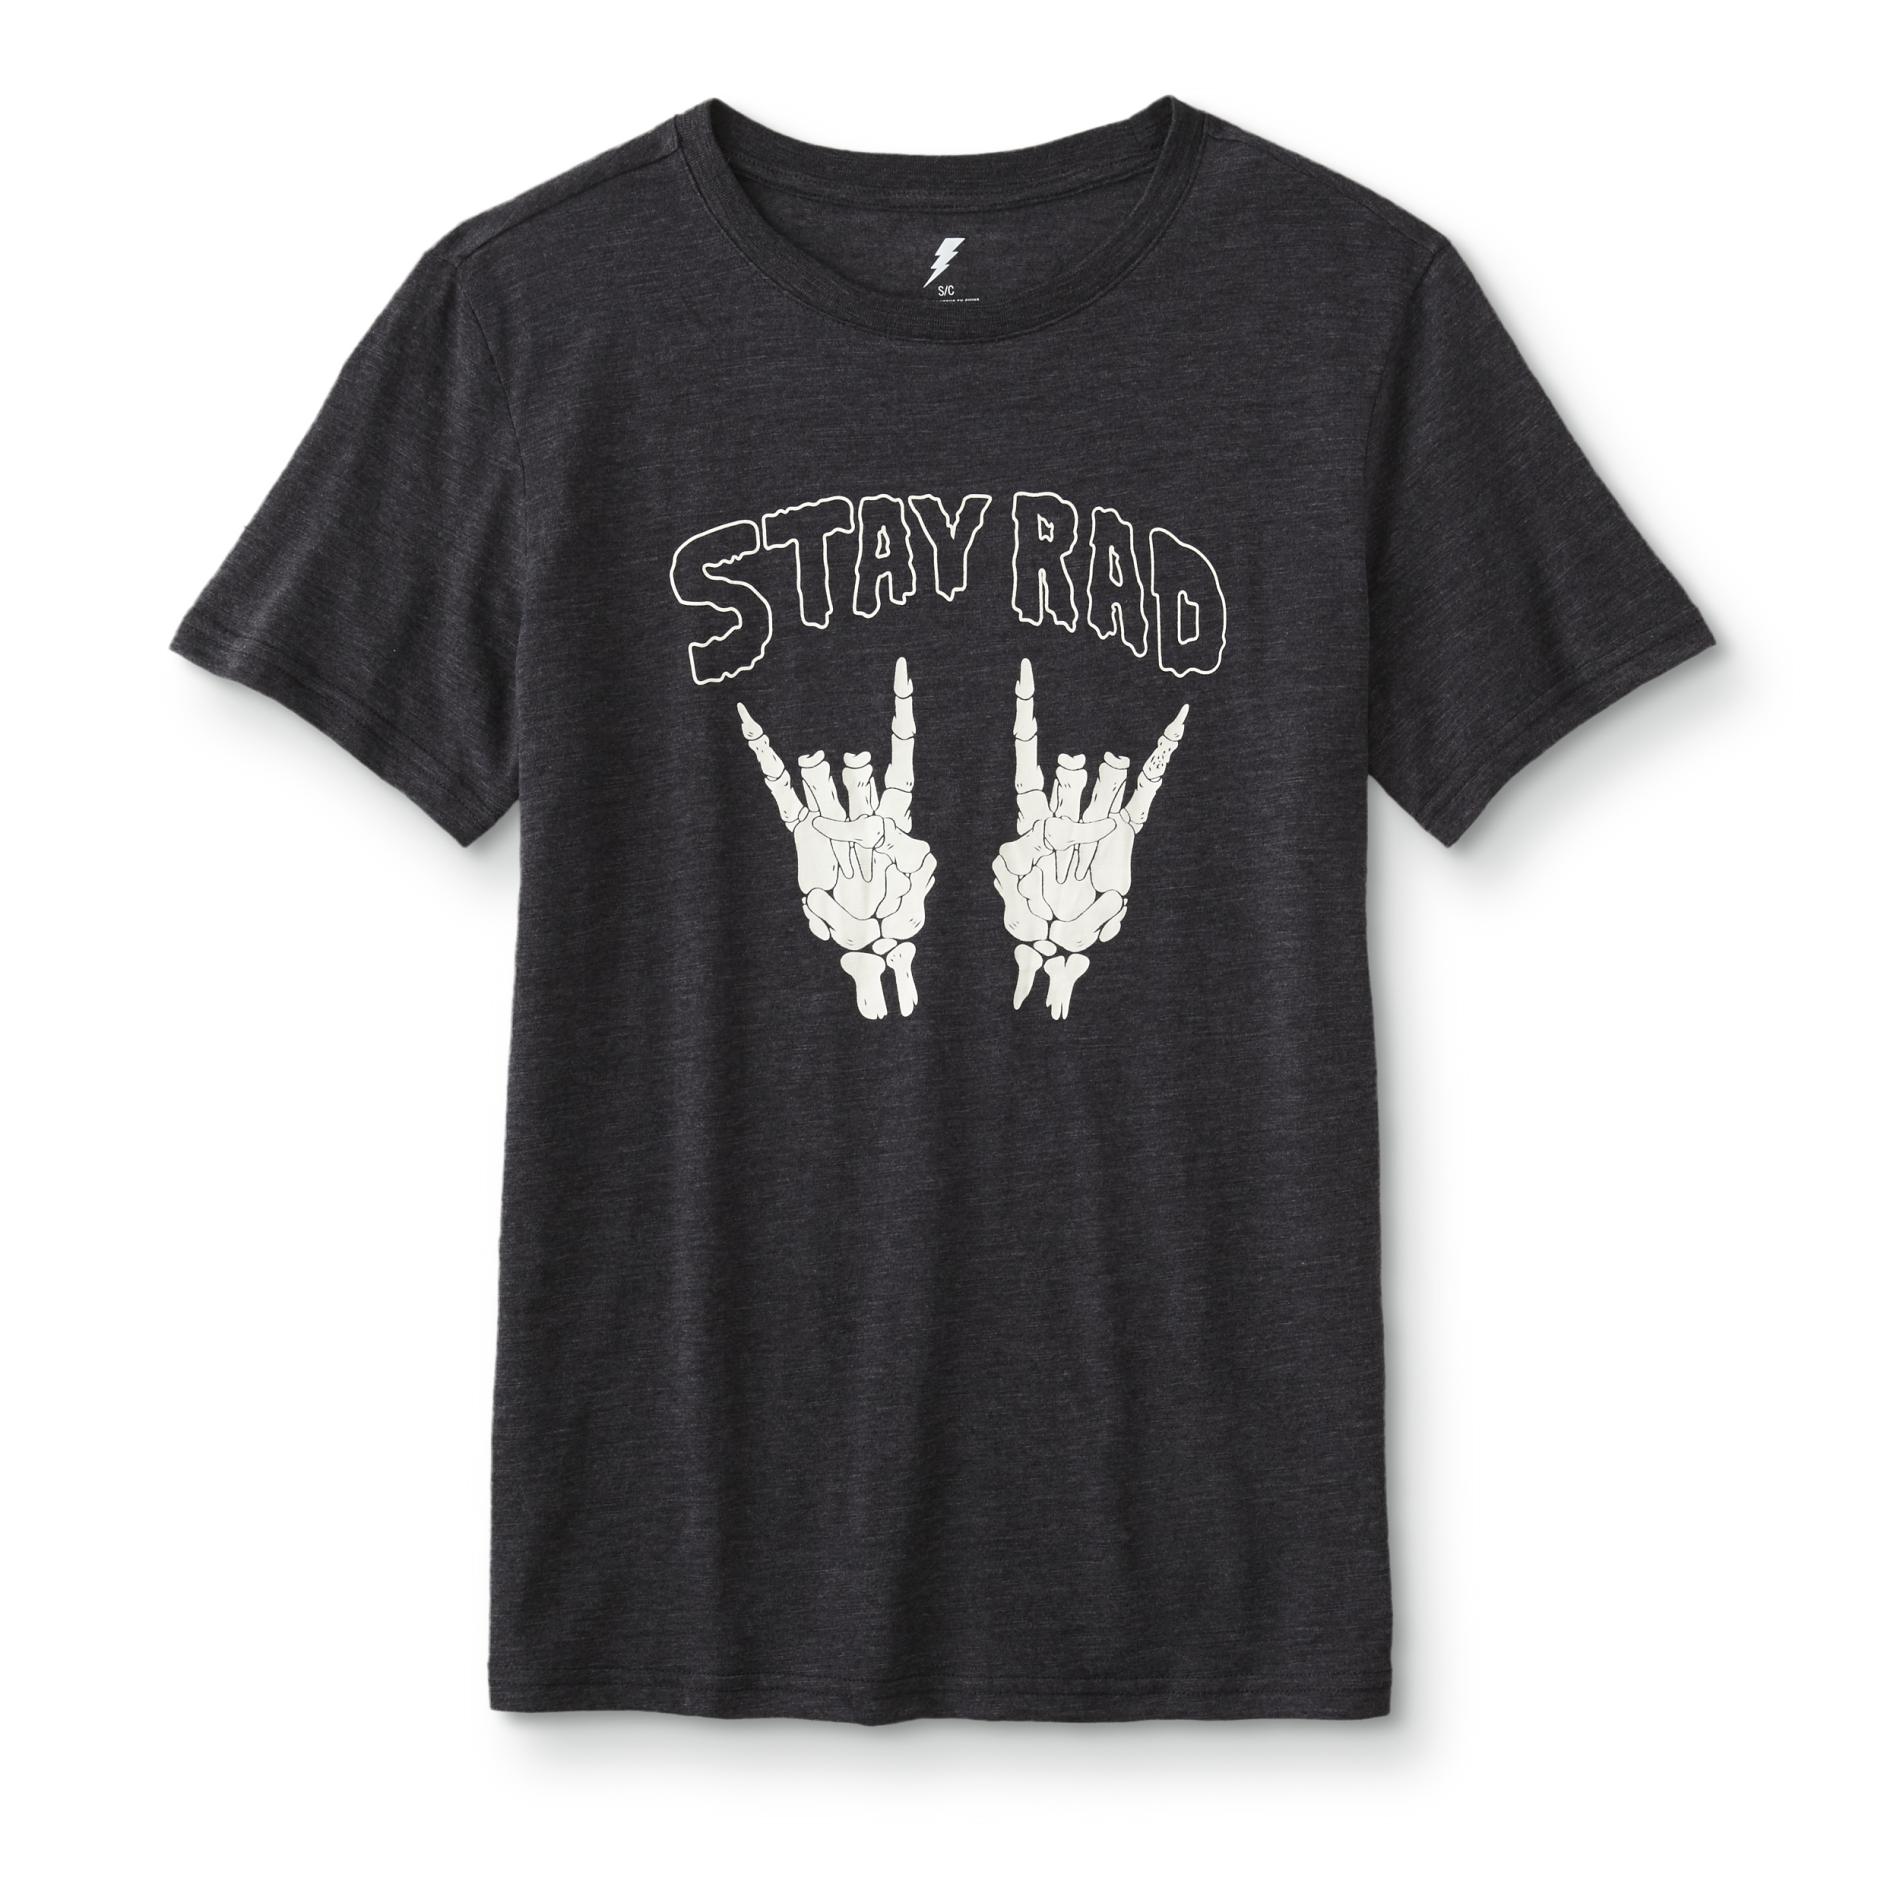 Amplify Young Men's Graphic T-Shirt - Stay Rad